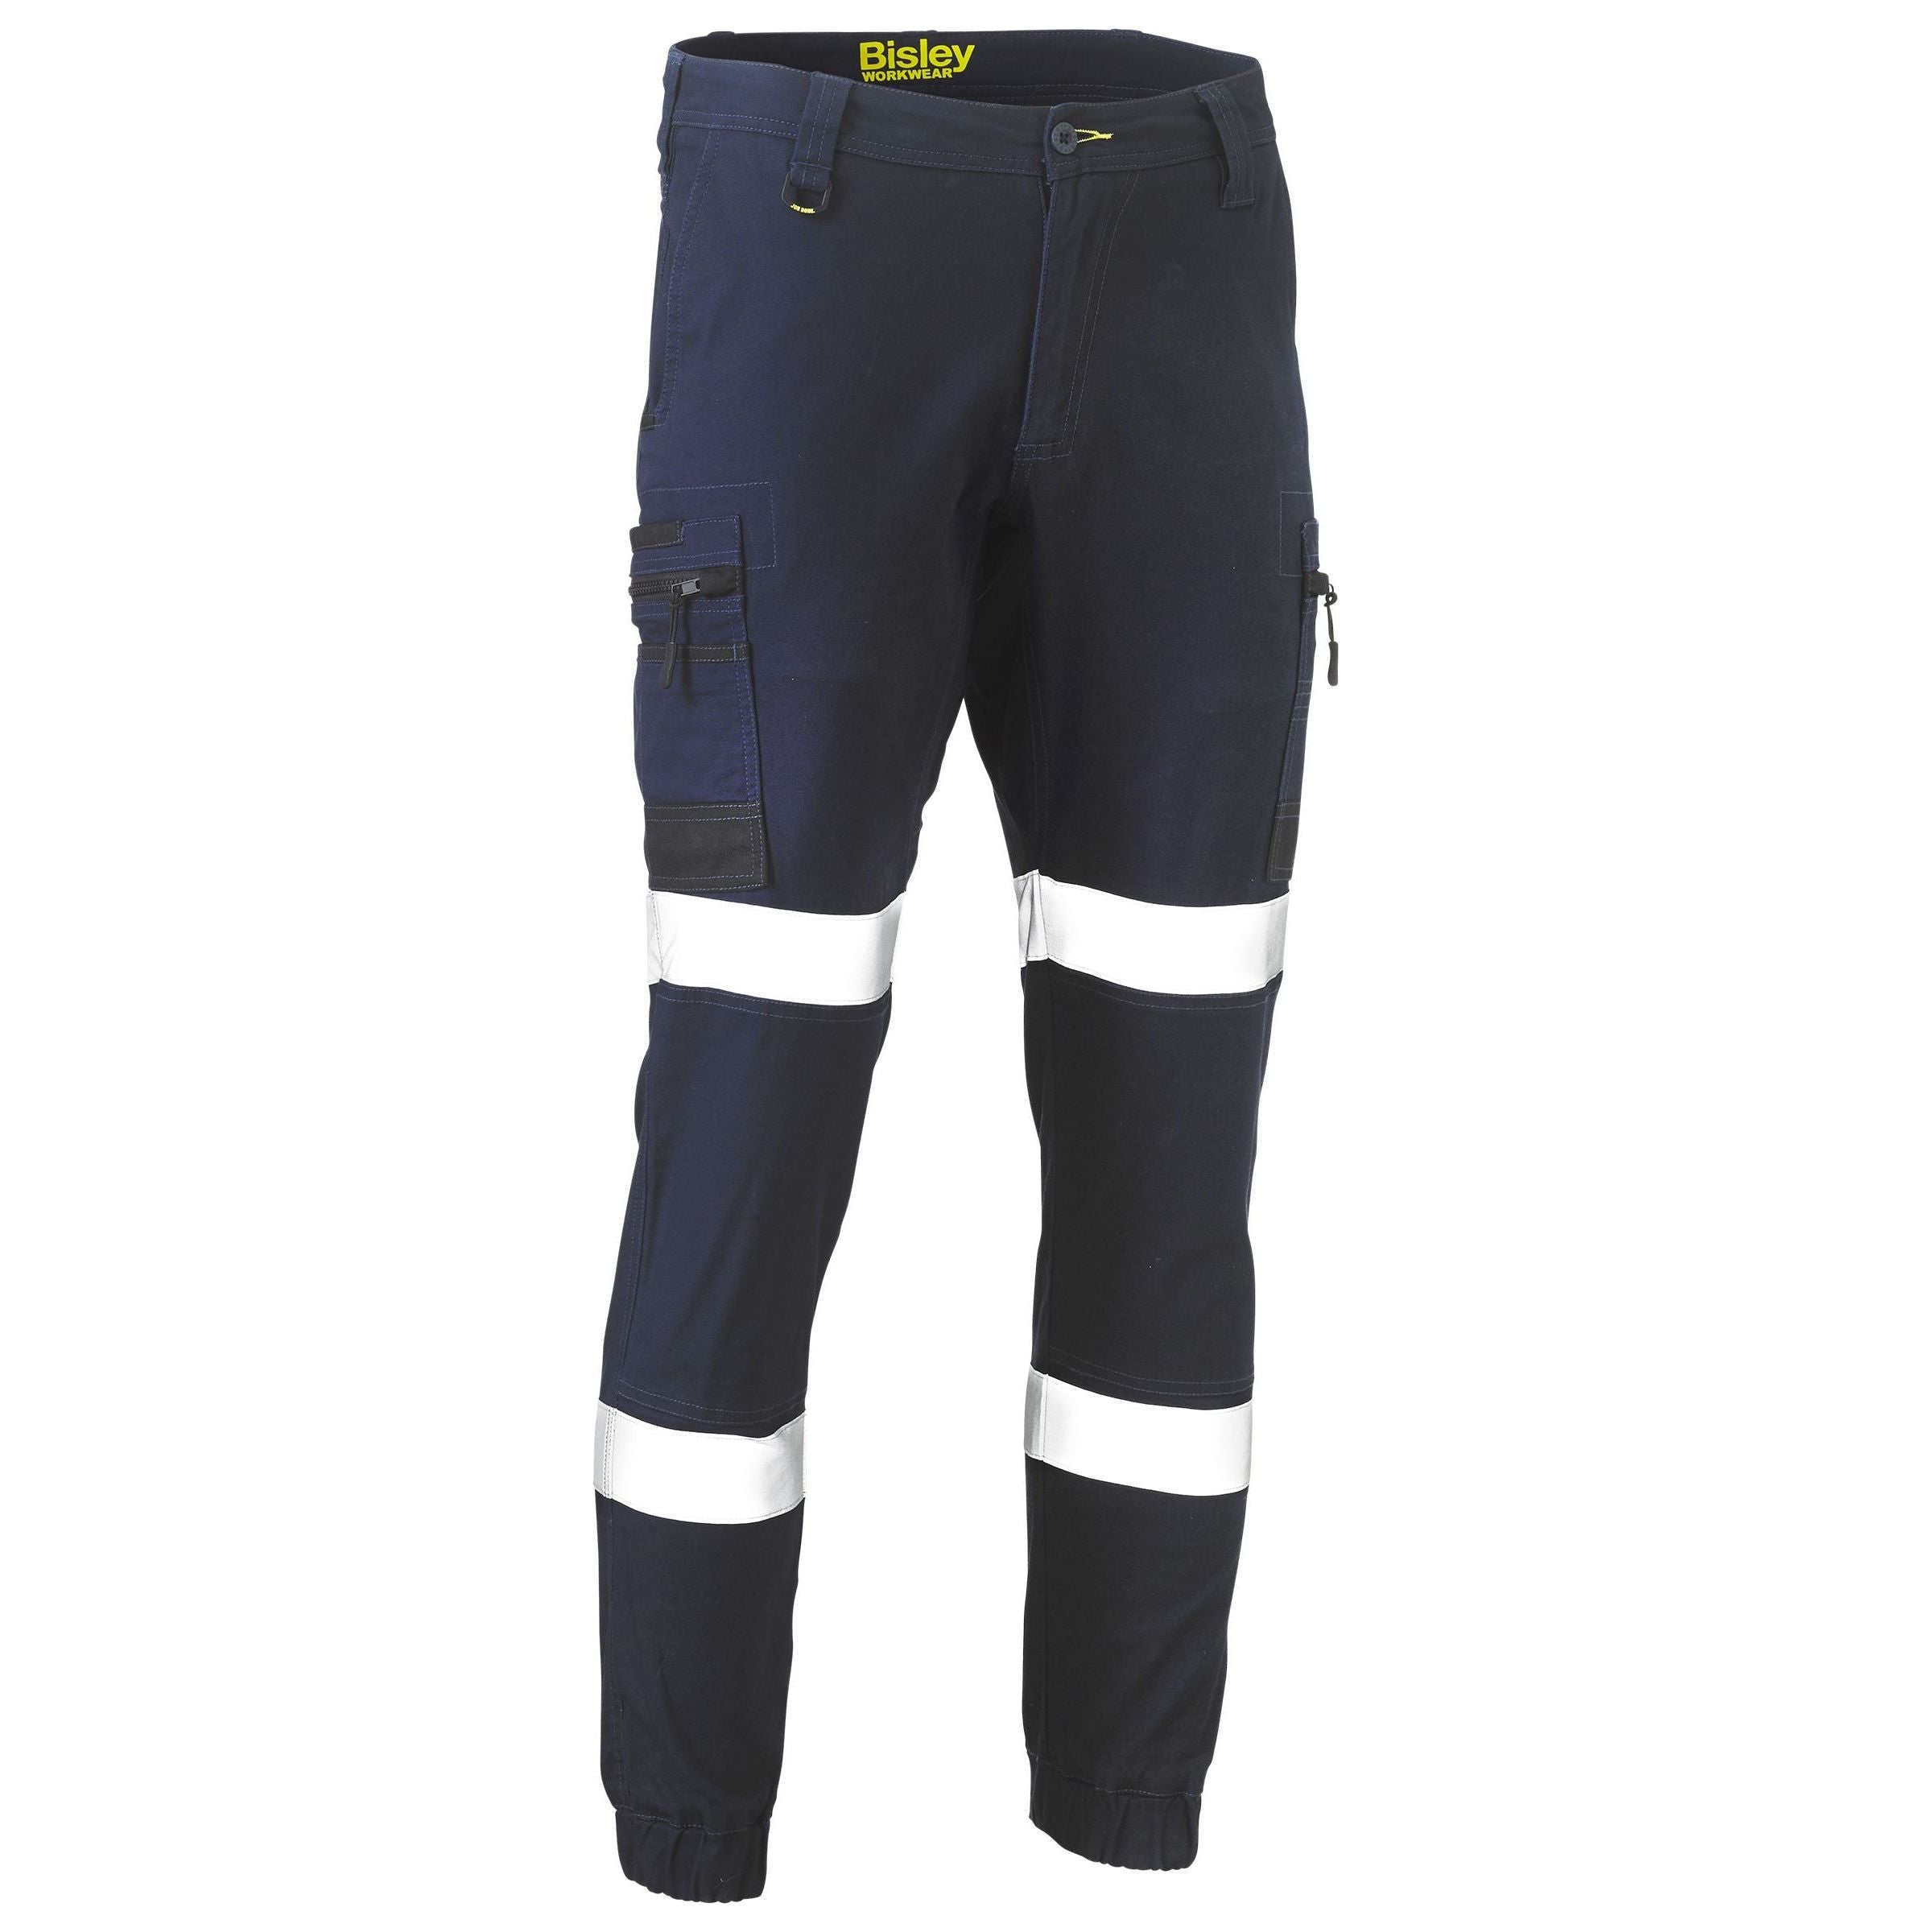 Bisley Flx and Move Taped Stretch Cargo Cuffed Pants - BPC6334T